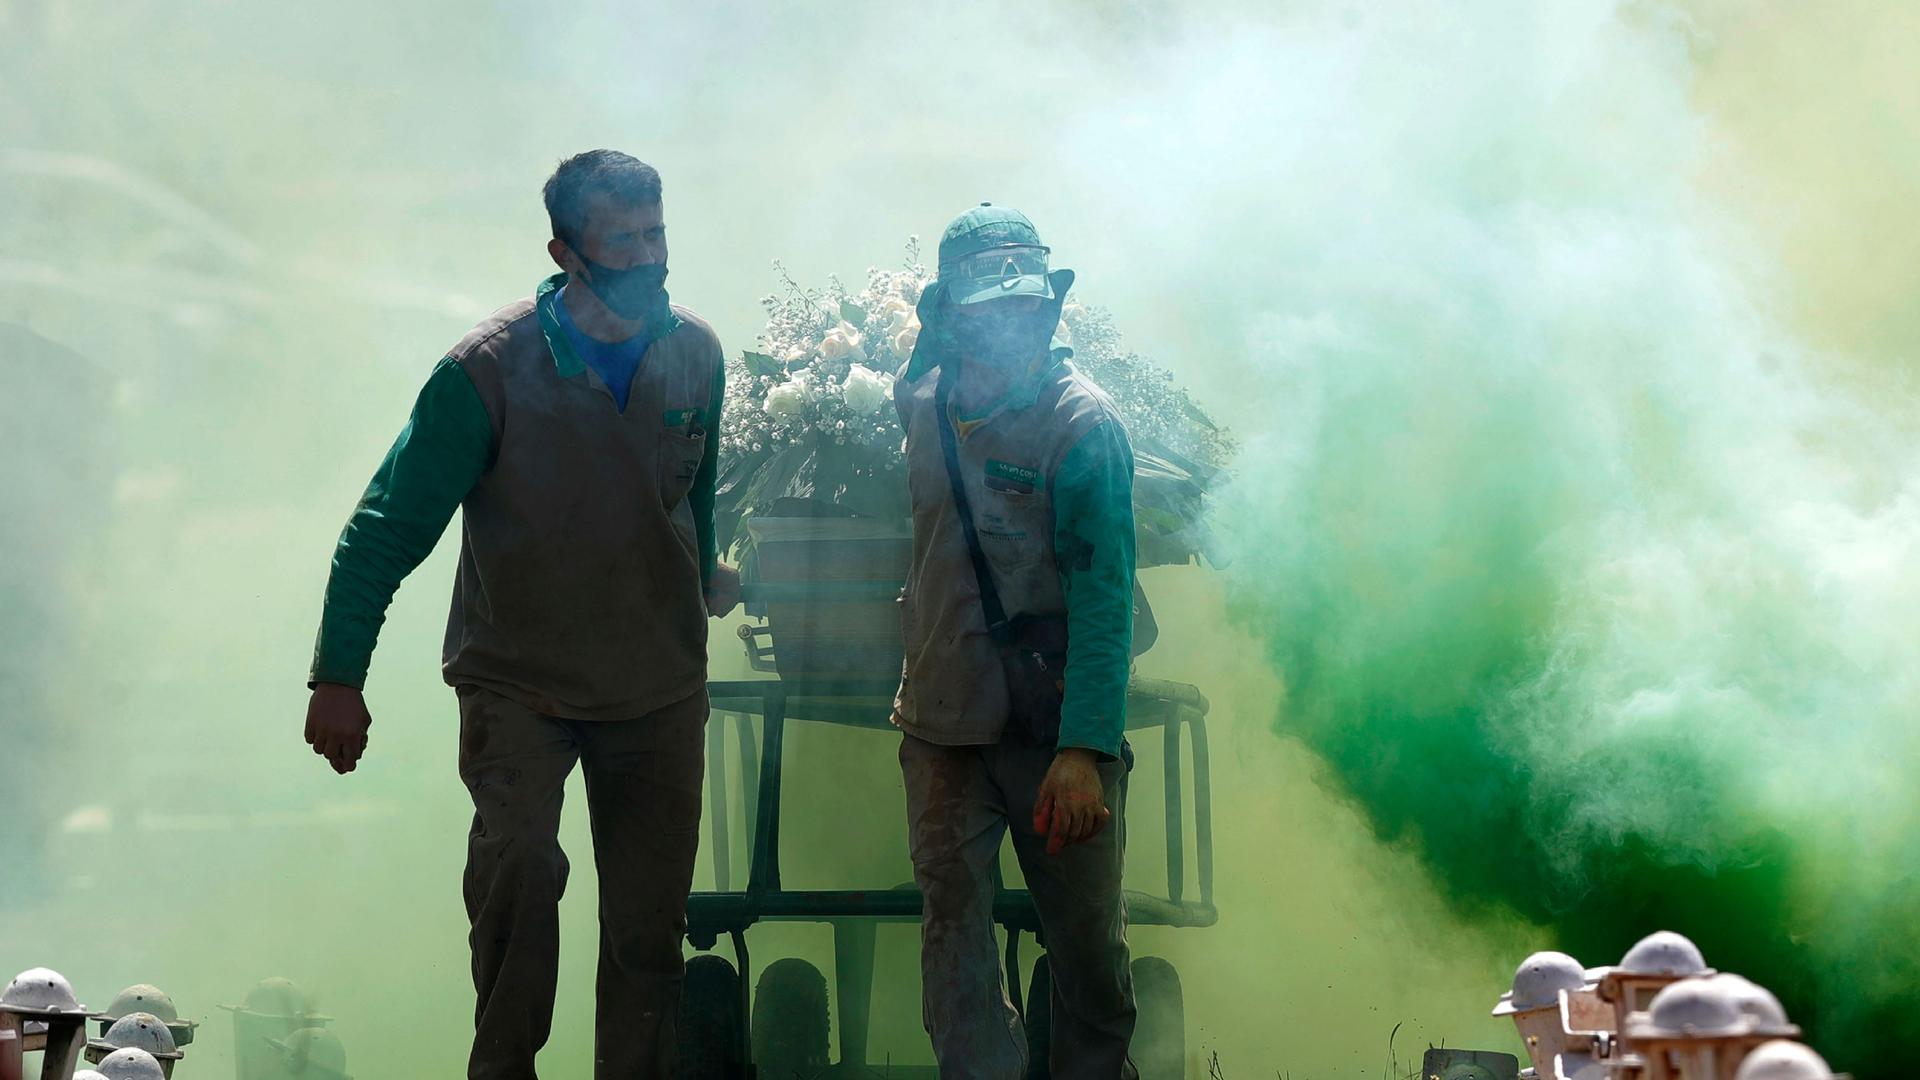 Two cemetery workers are shown pulling a casket on wheels with ceremonial green smoke surrounding them.